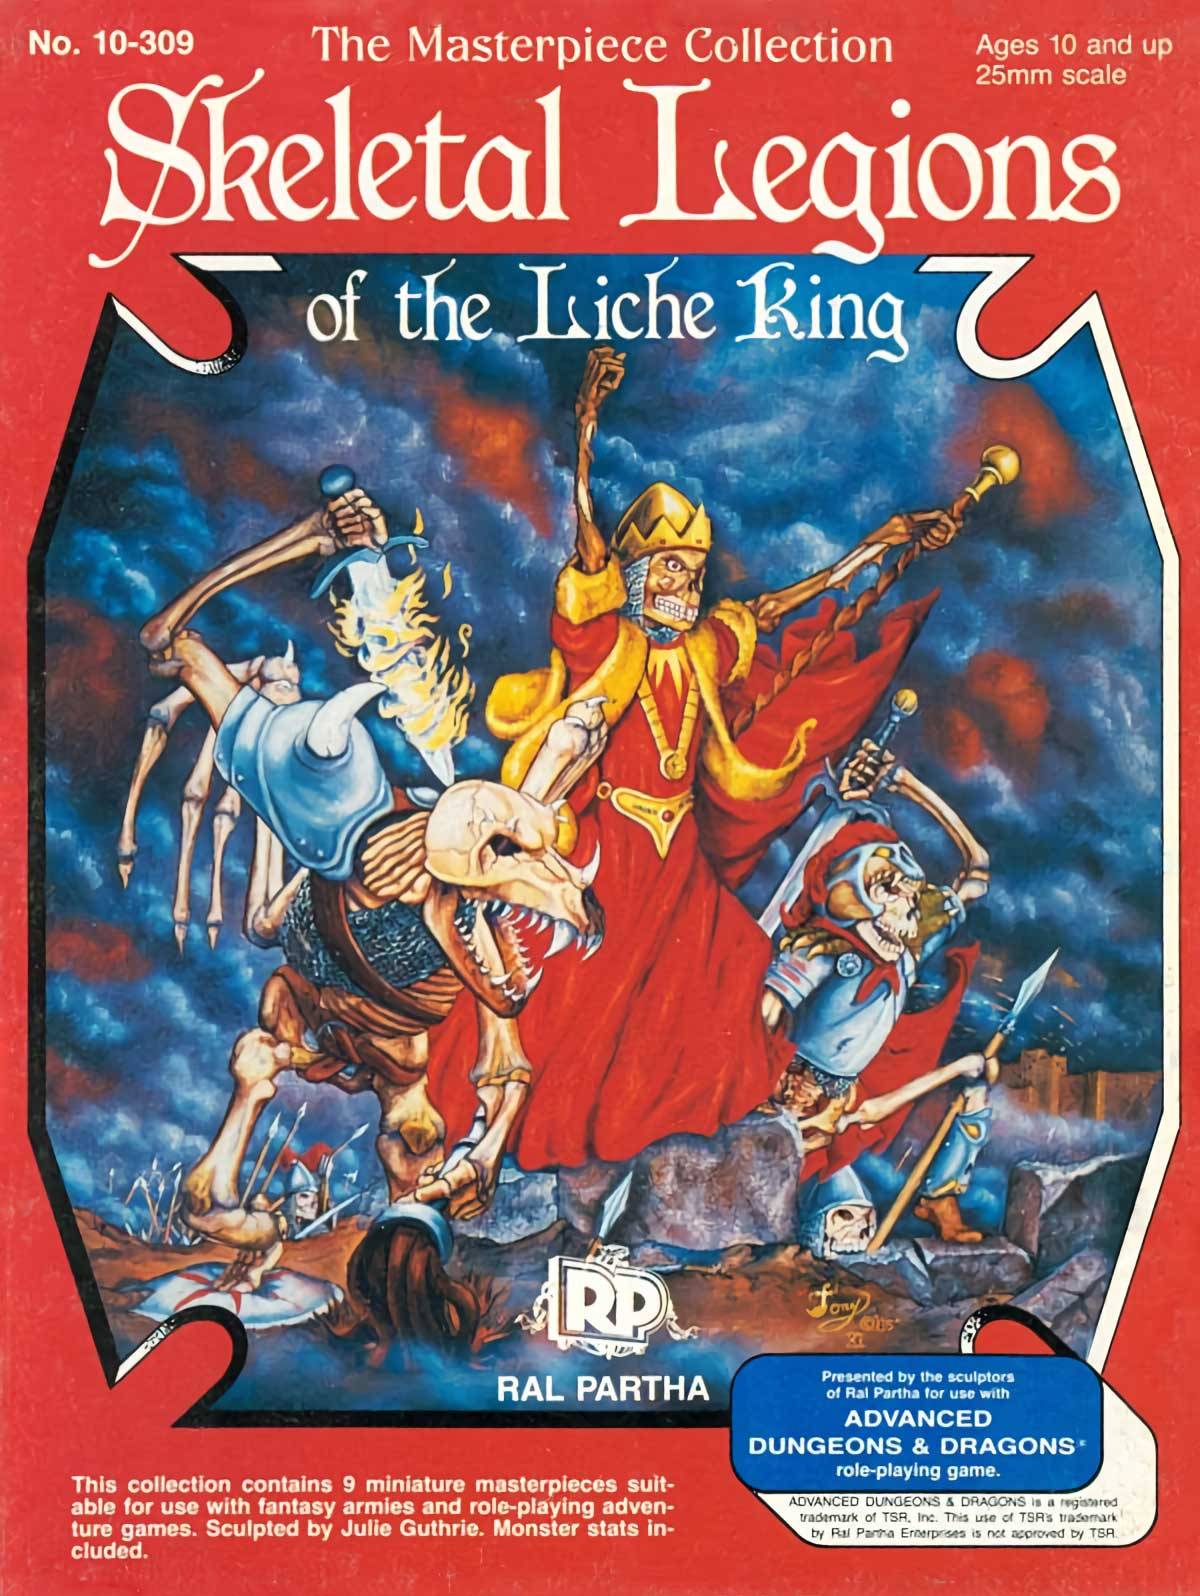 Skeletal Legions of the Liche King, Tony Orzech box art for Ral Partha’s 1985 Masterpiece Collection box set of miniatures sculpted by Julie Guthrie